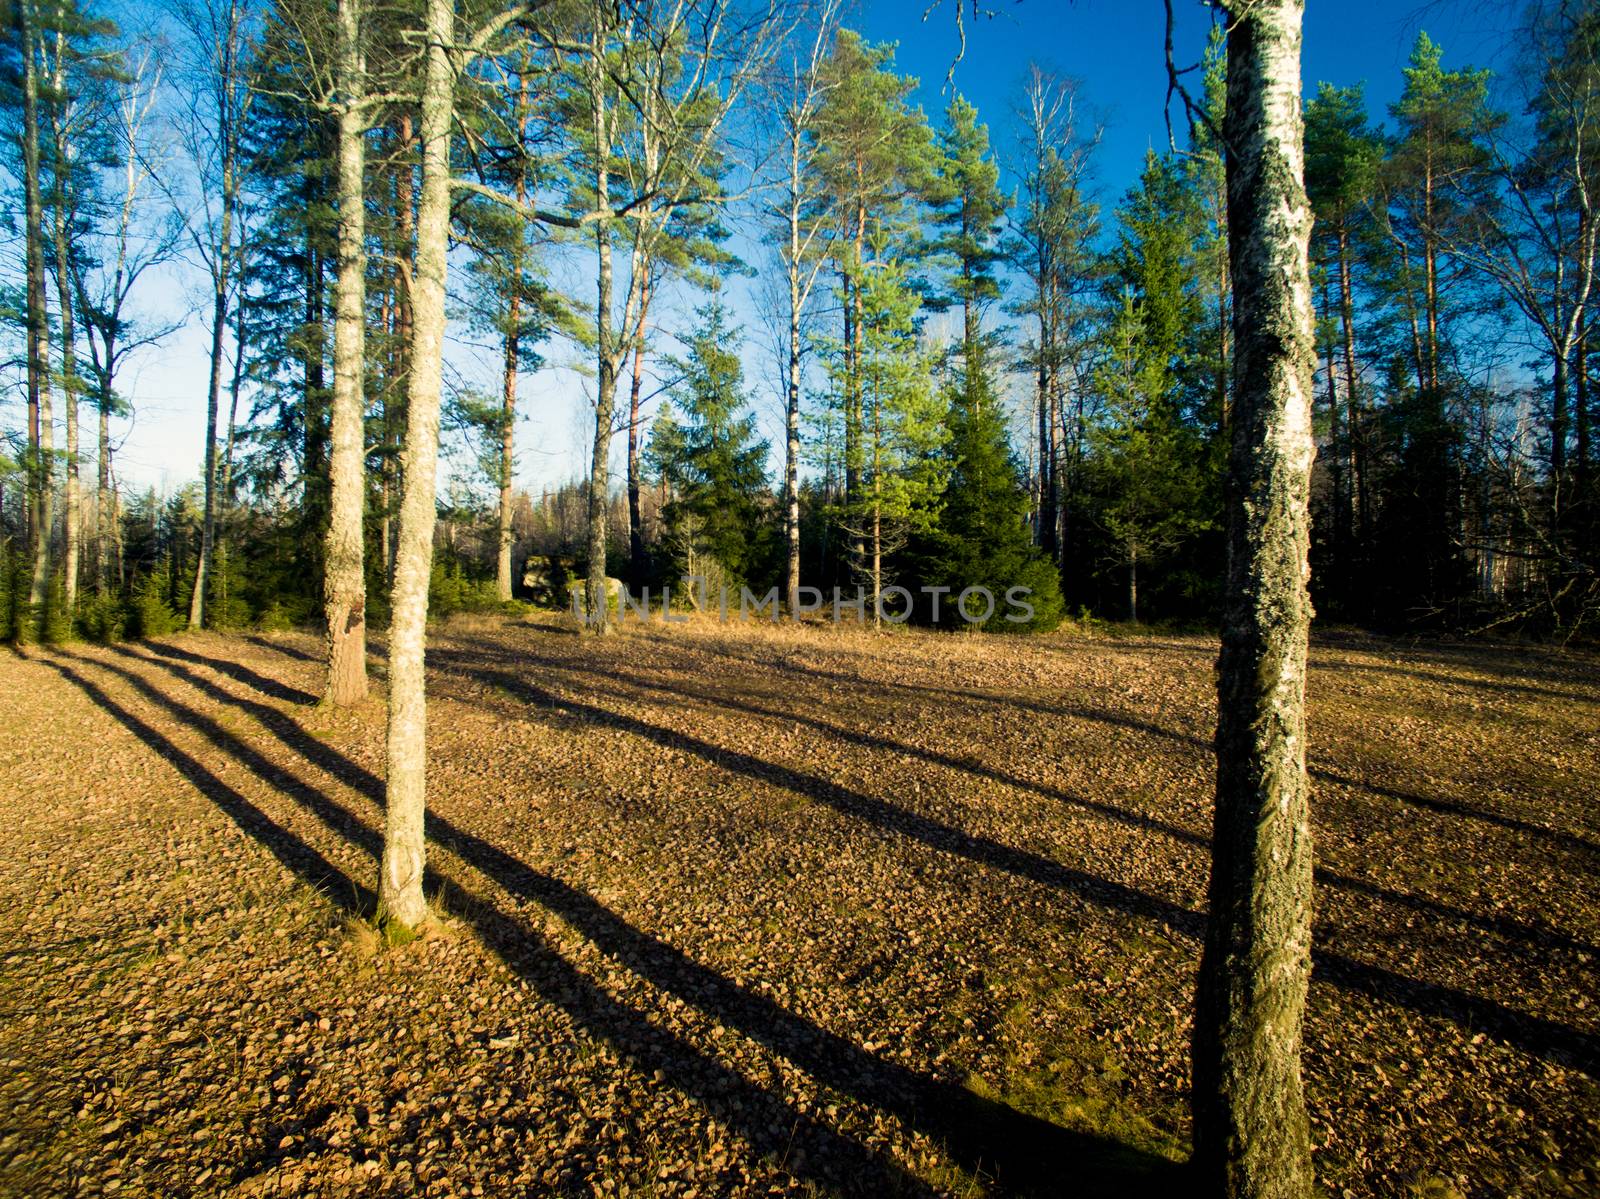 Long shadows in the woods